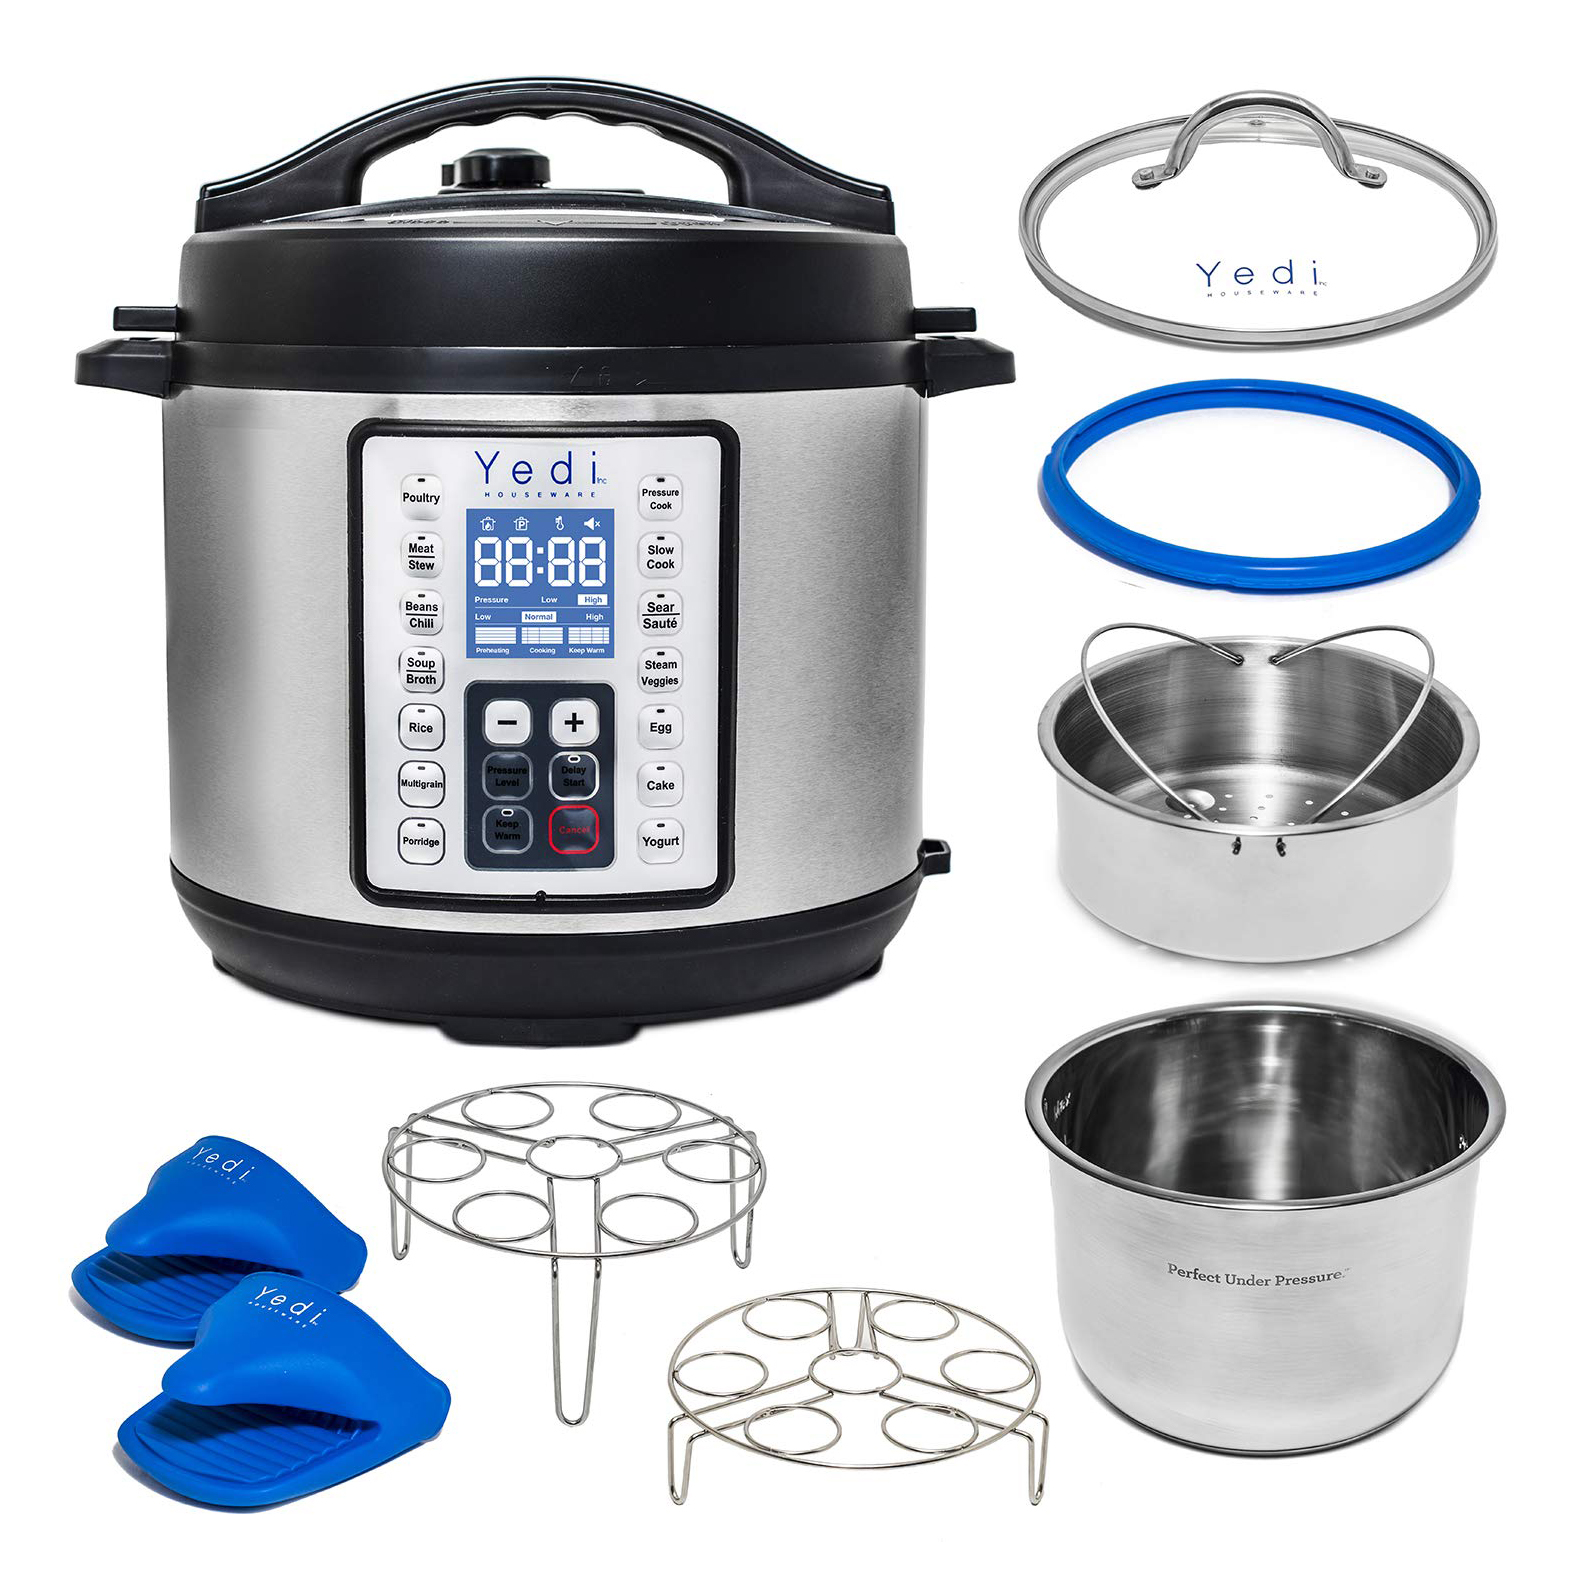 10 Rated Best Electronic Pressure Cookers in 2021 - Put Product Reviews